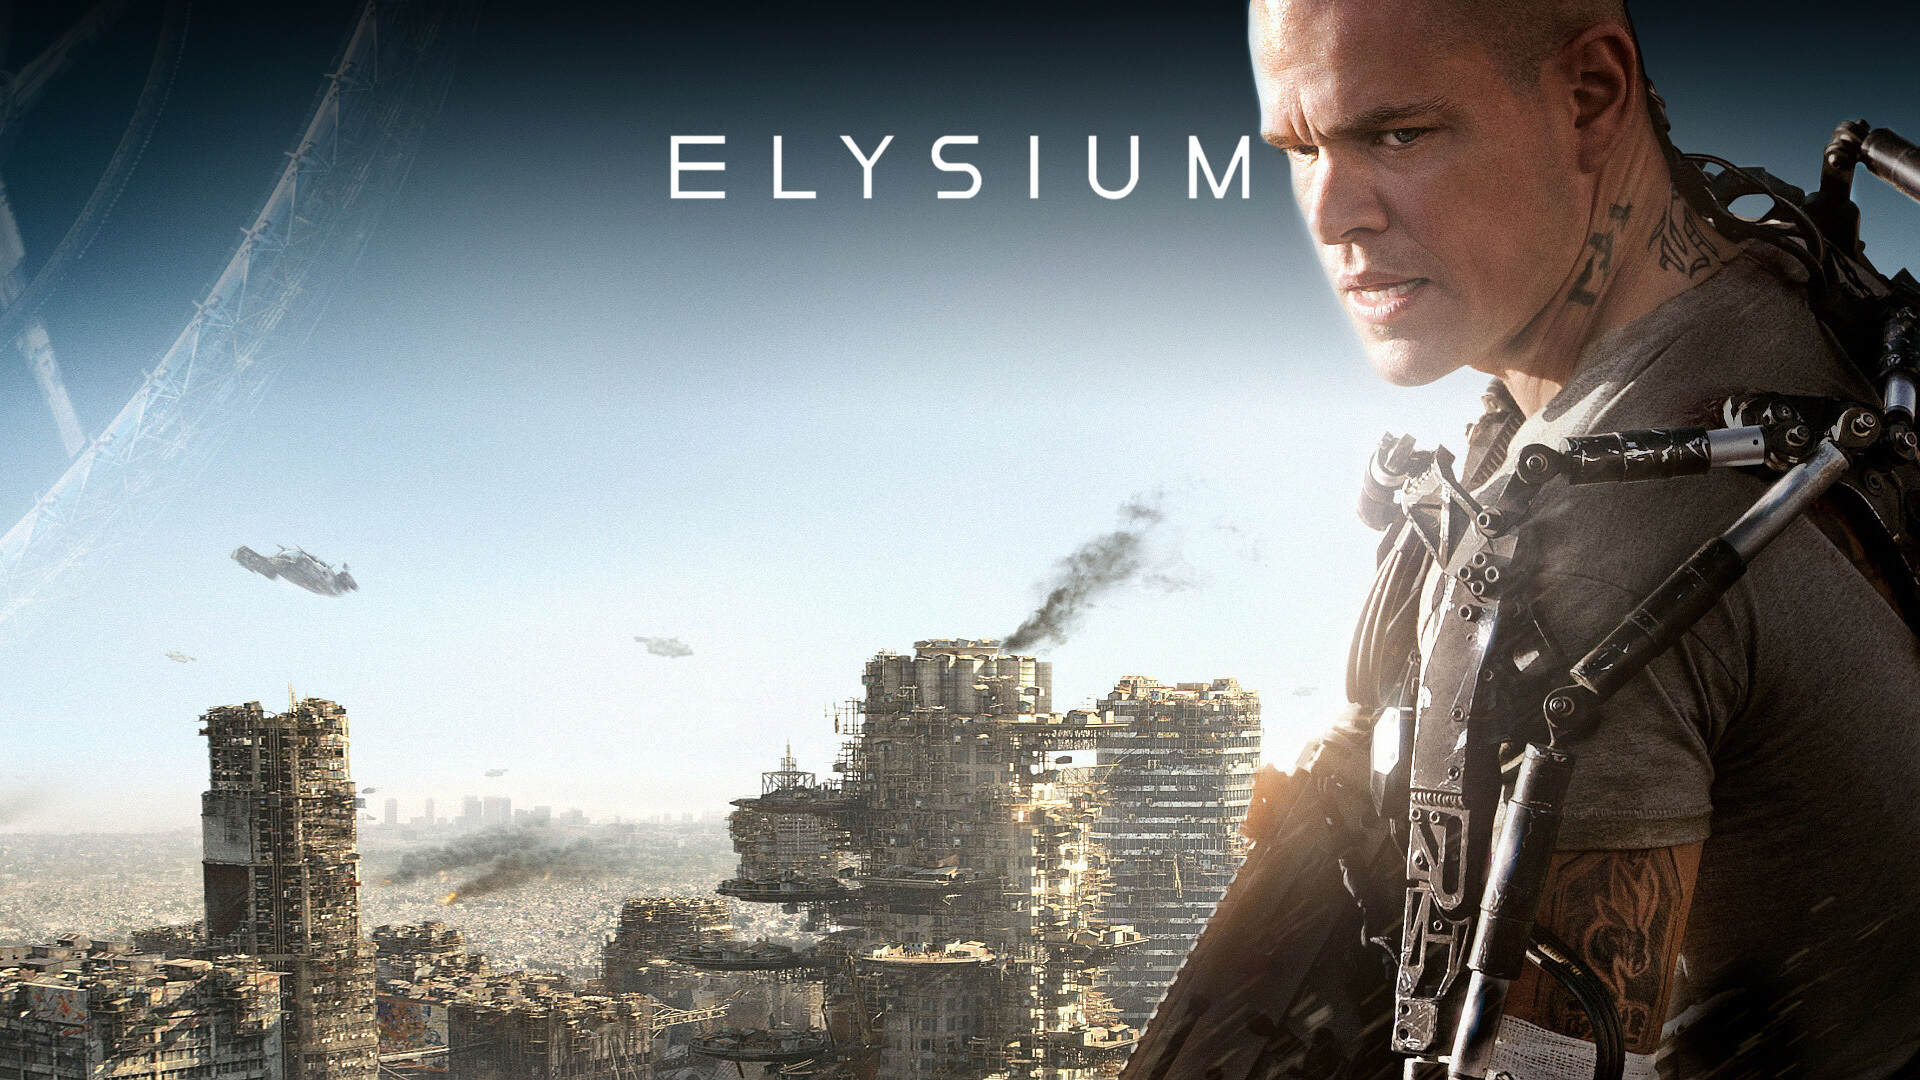 38-facts-about-the-movie-elysium